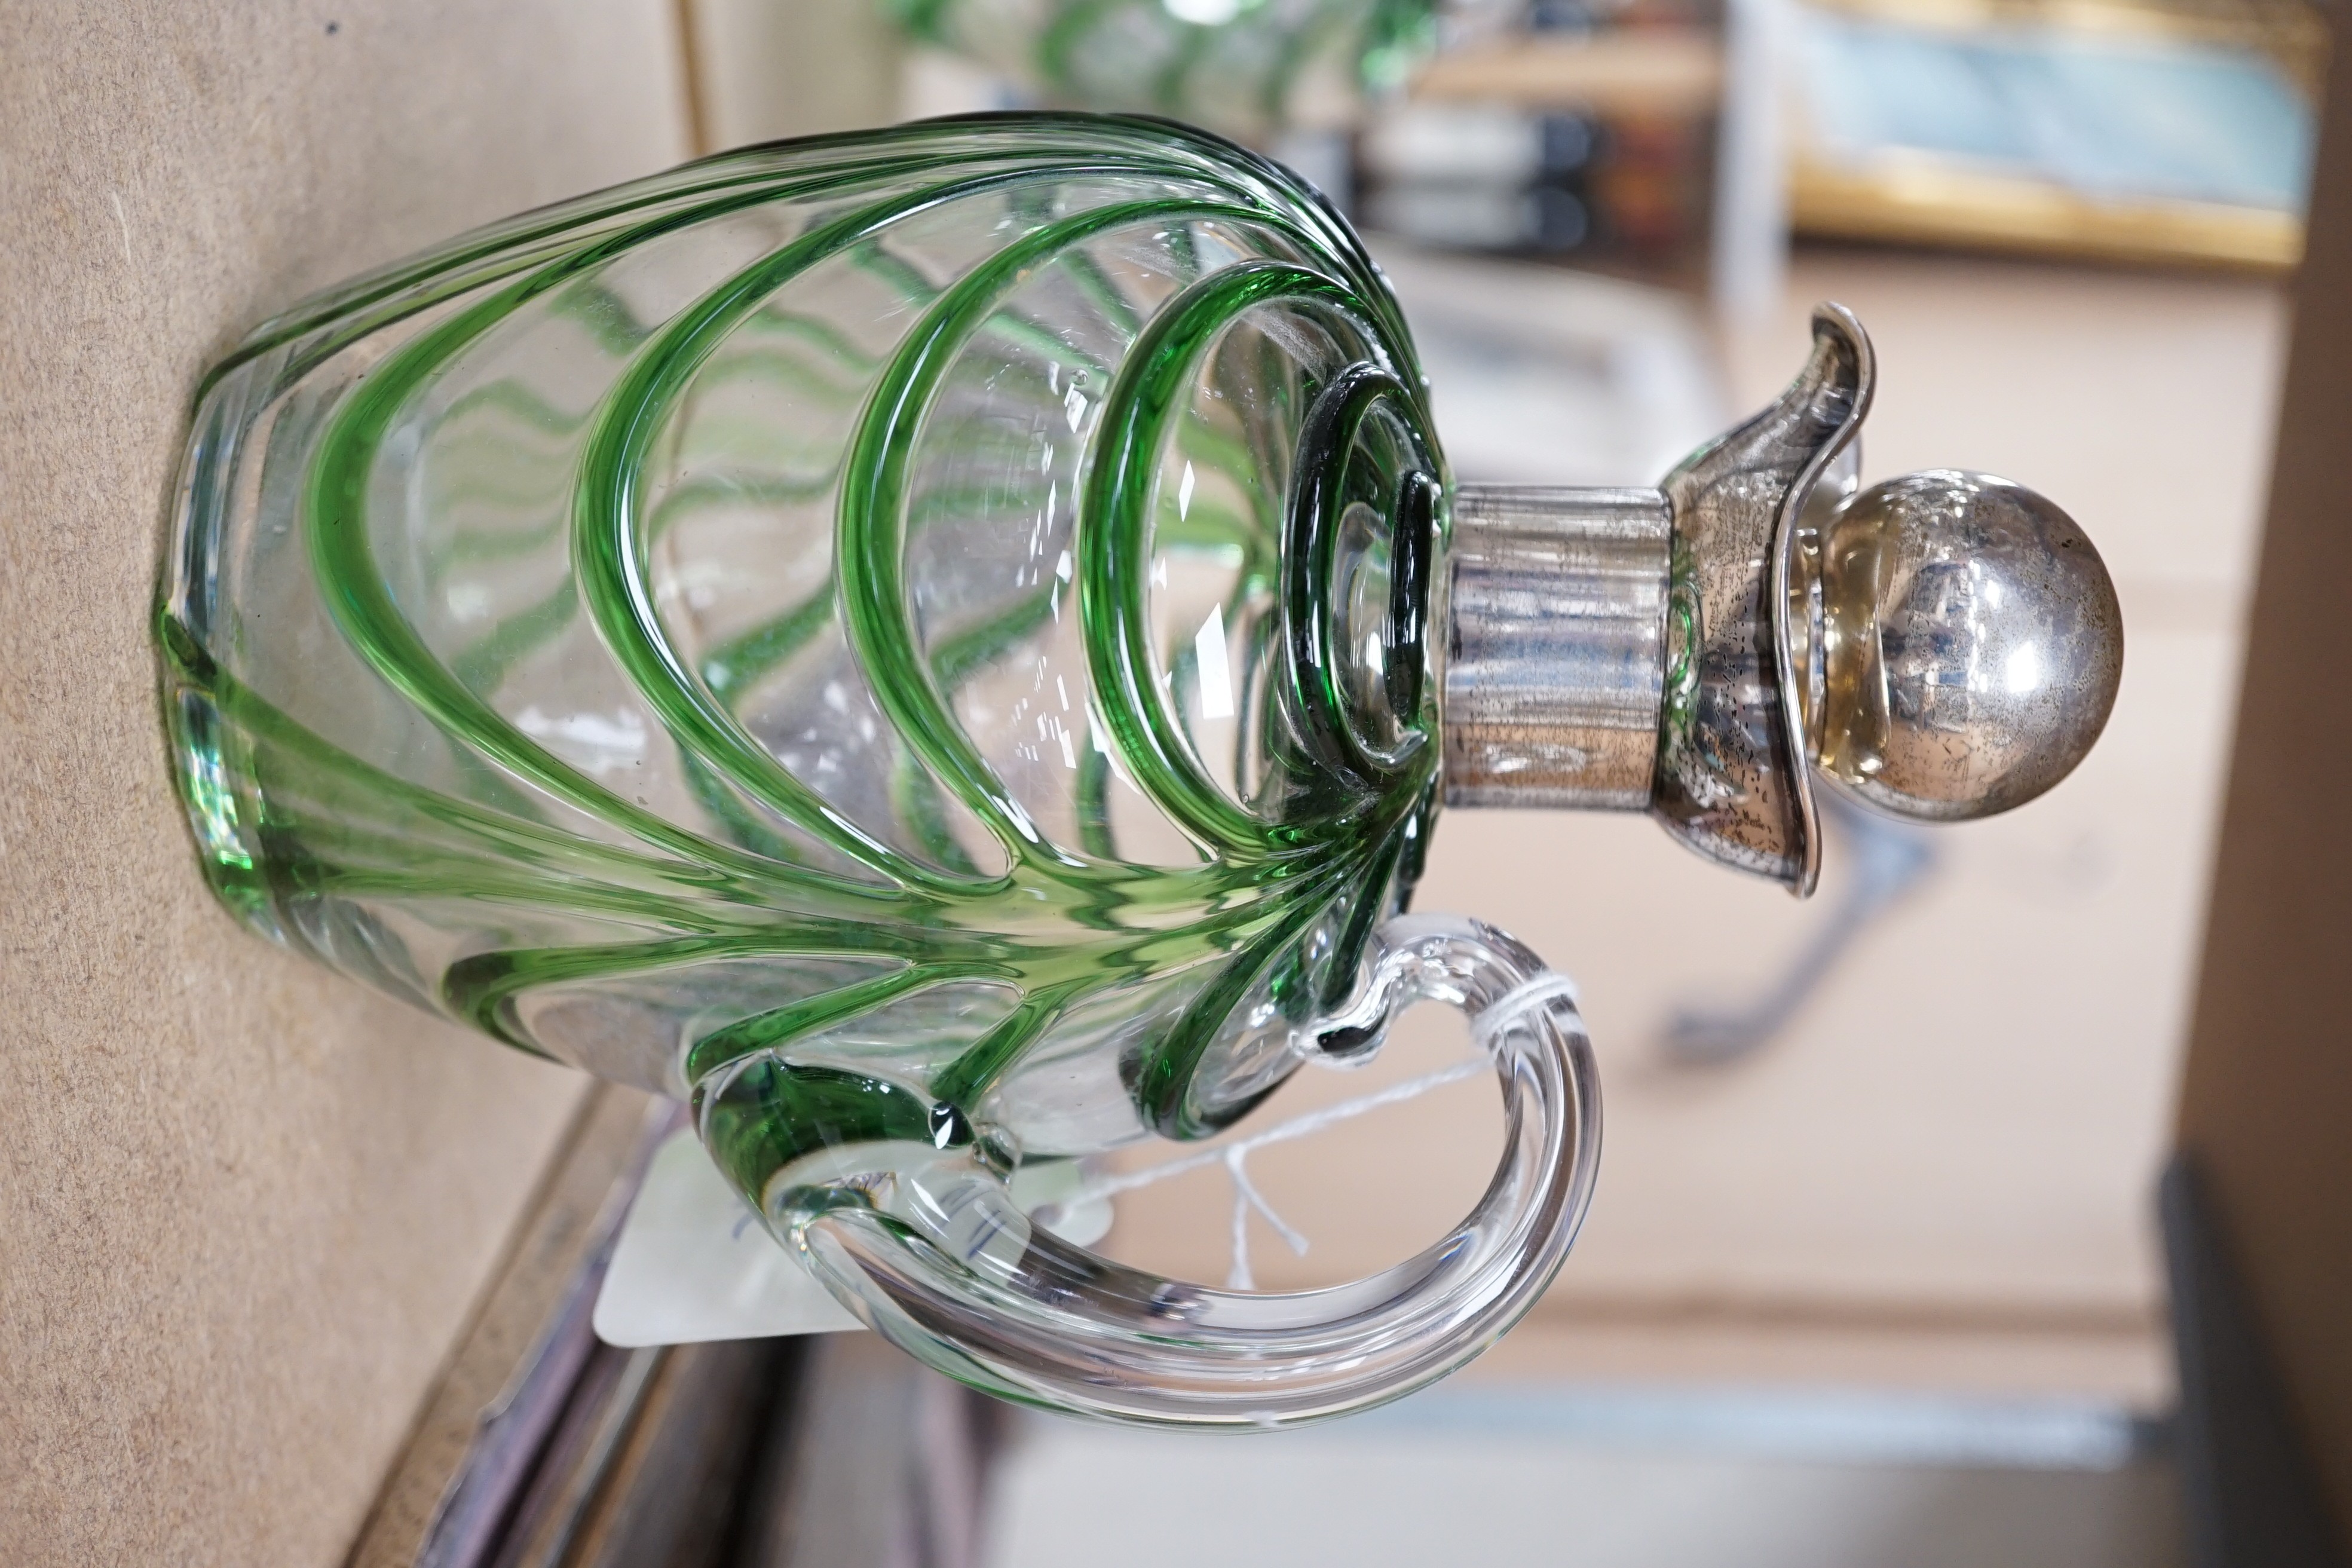 A late Victorian Art Nouveau silver mounted glass claret jug and stopper, D & M Davis, Birmingham, 1900, the glass with ribbed green swags, height 20.7cm.